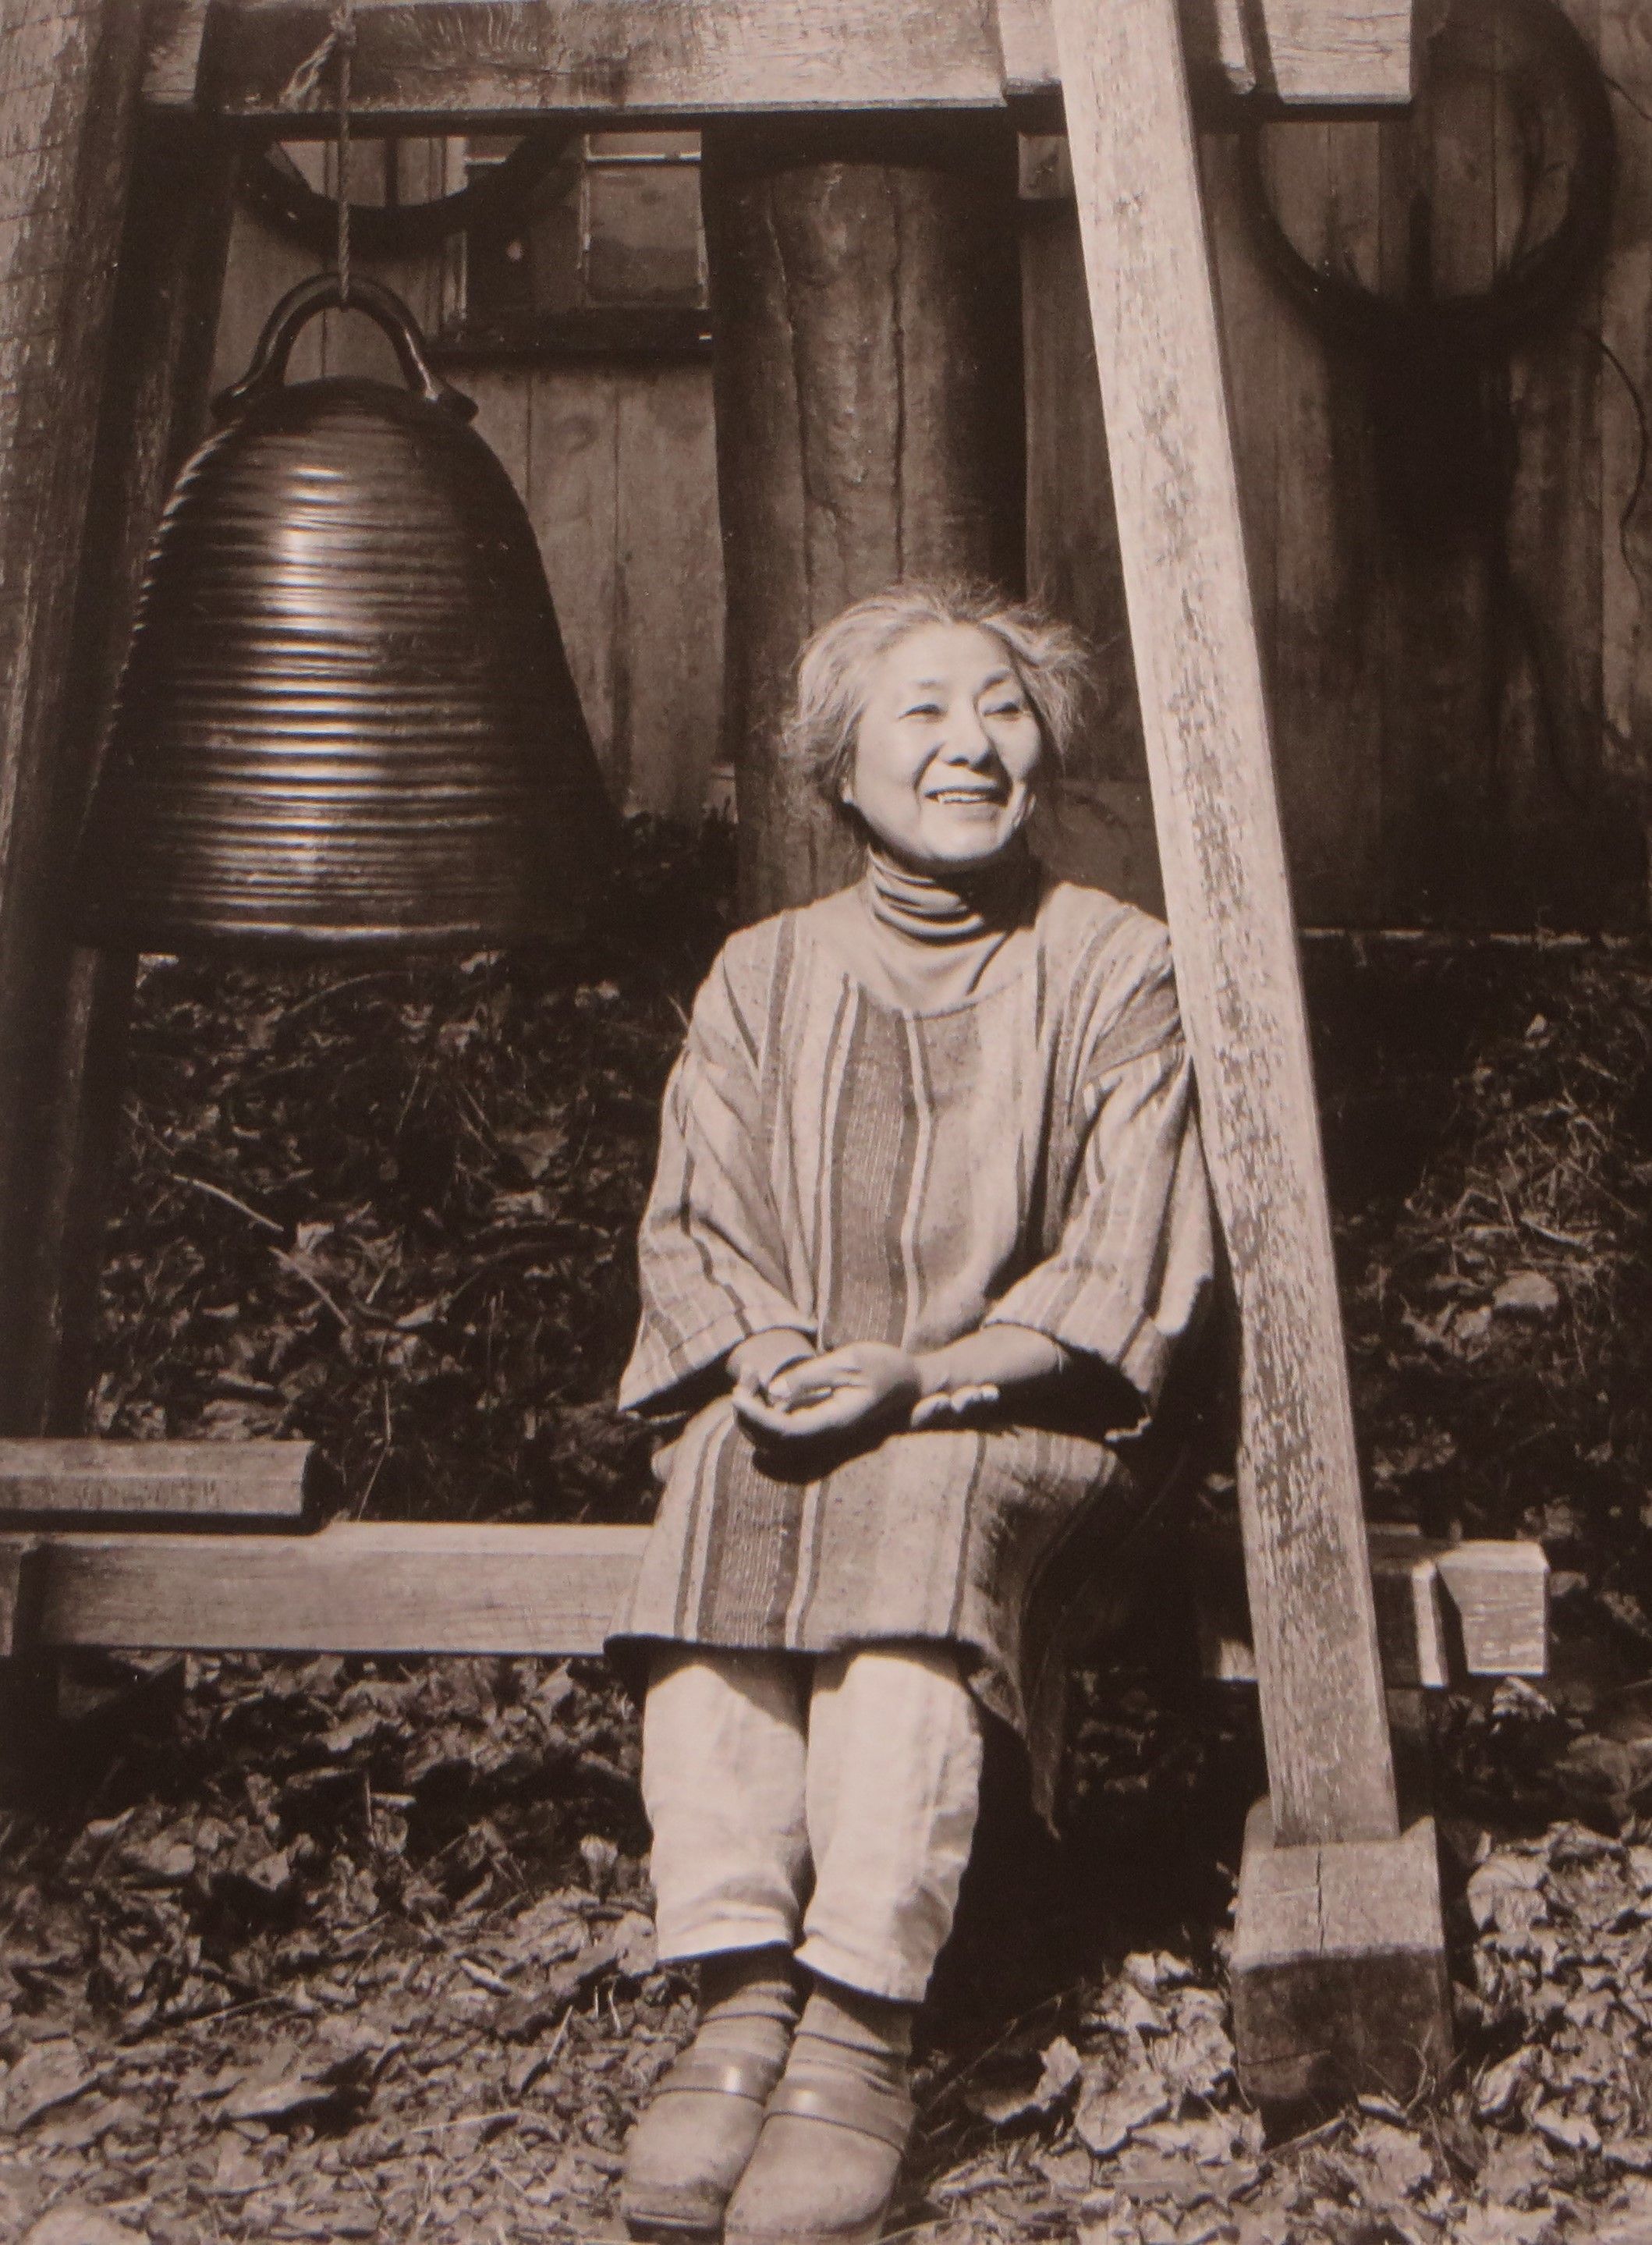 sepia toned photgraph of Toshiko Takezu seated next to a large bell outdoors